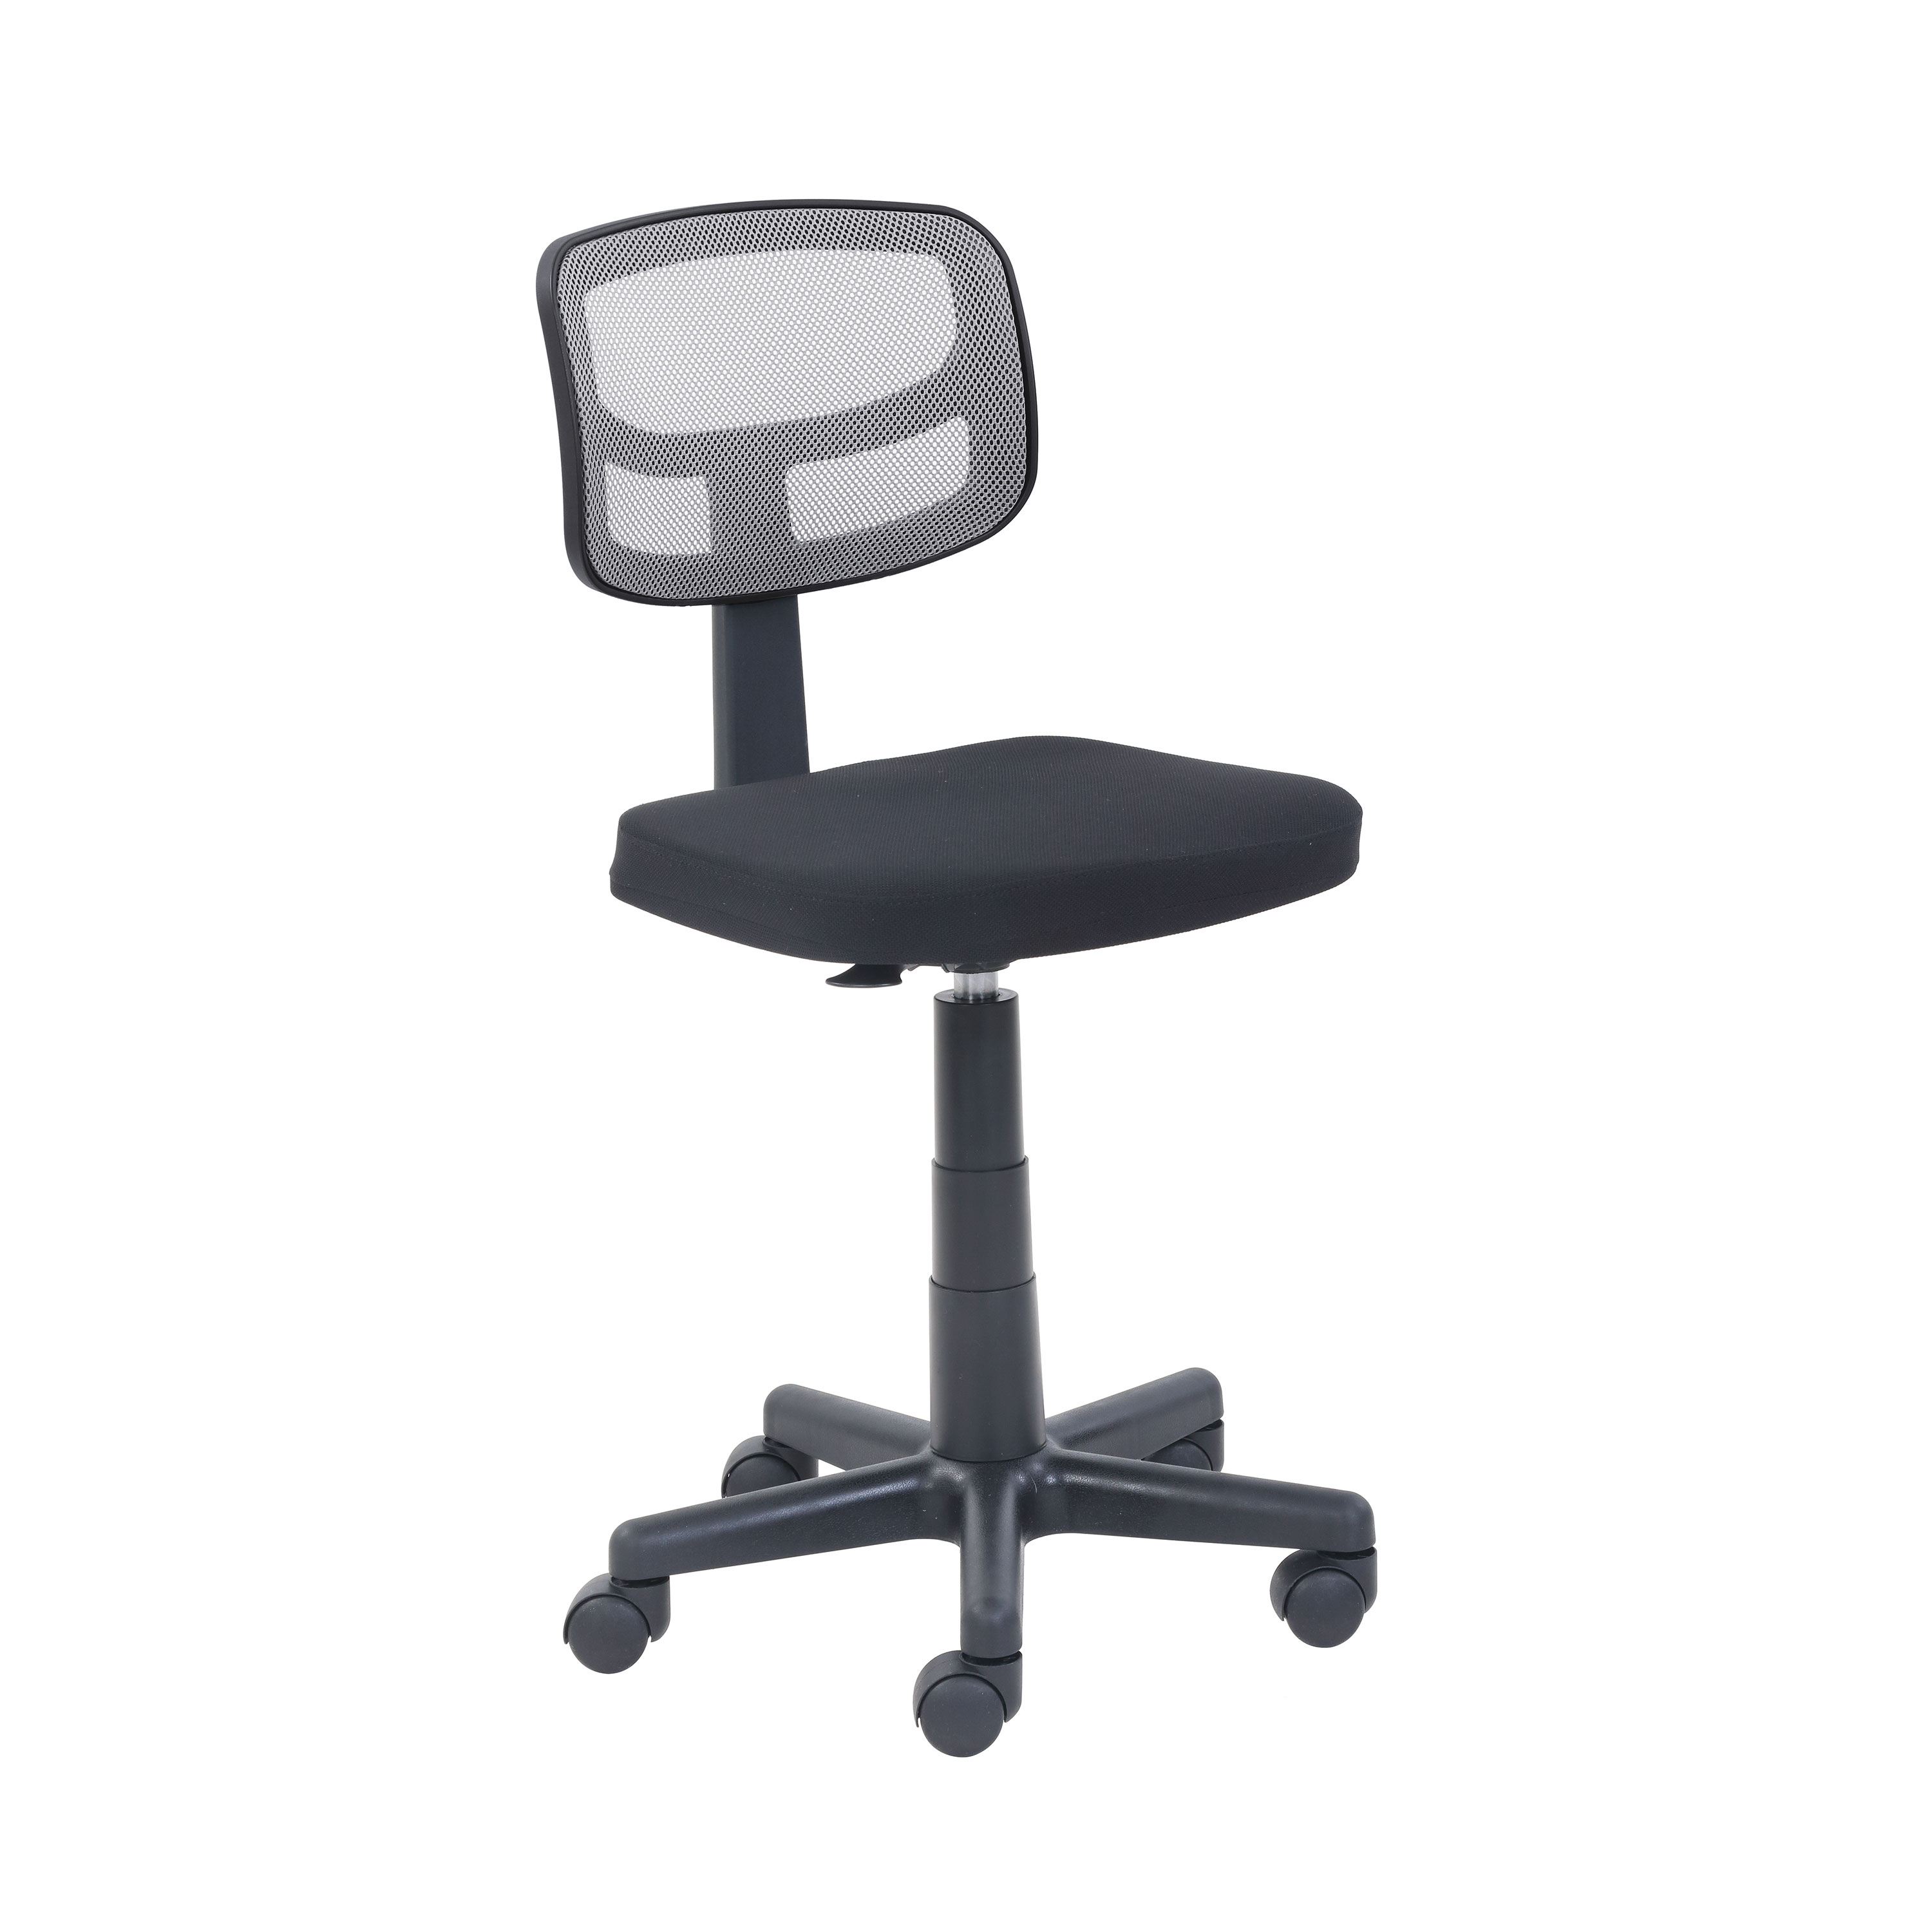 Mainstays Mesh Task Chair with Plush Padded Seat, Gray - image 2 of 9